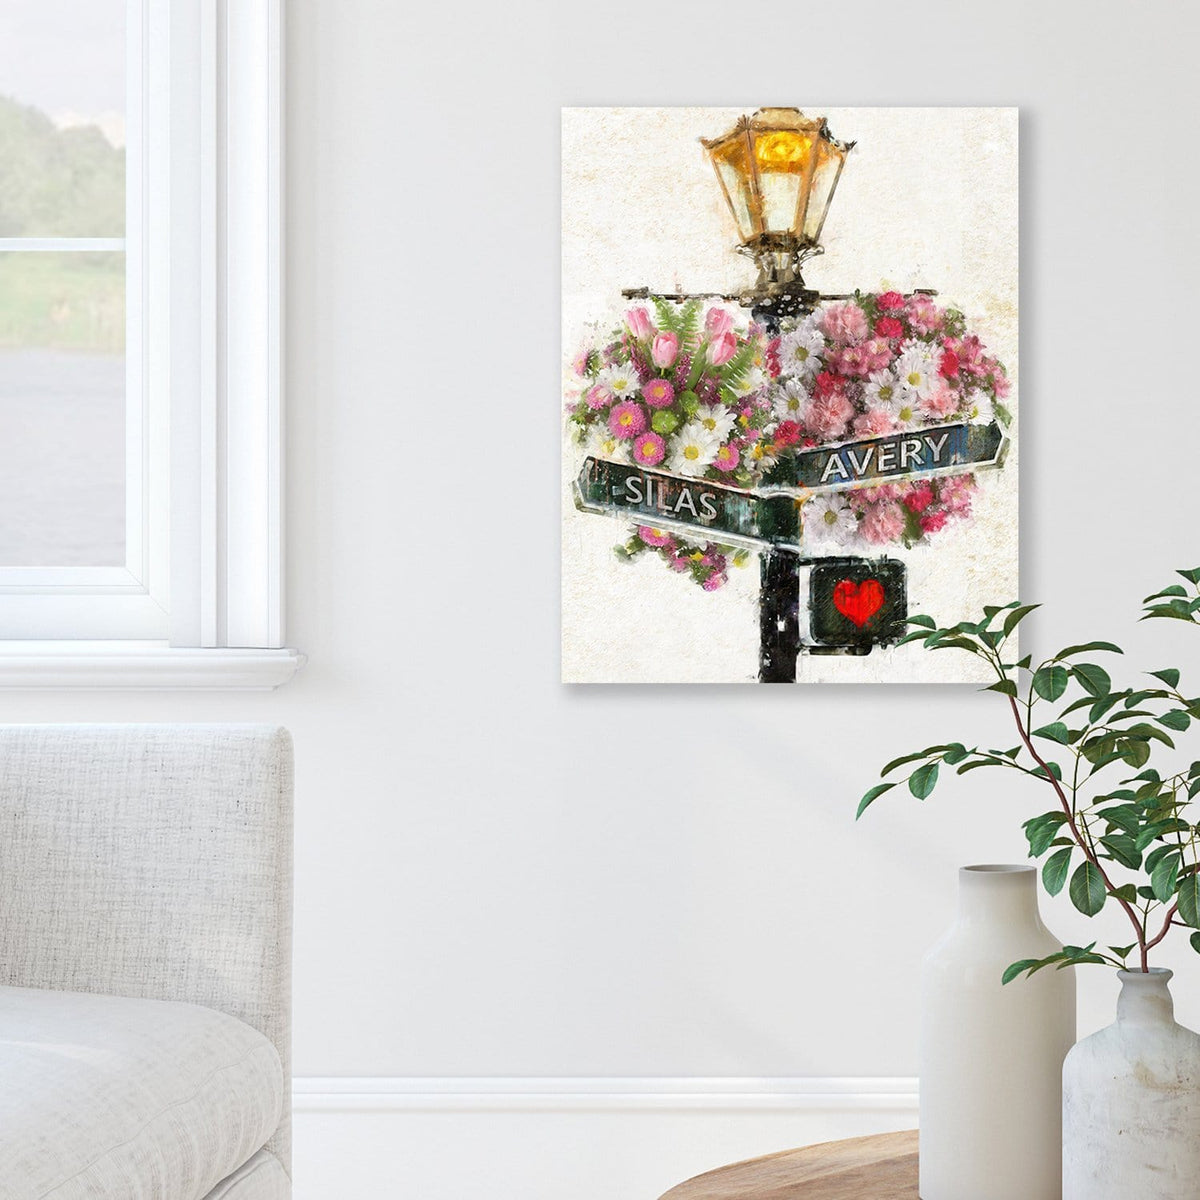 Romantic personalized gifts for her from Personal Prints